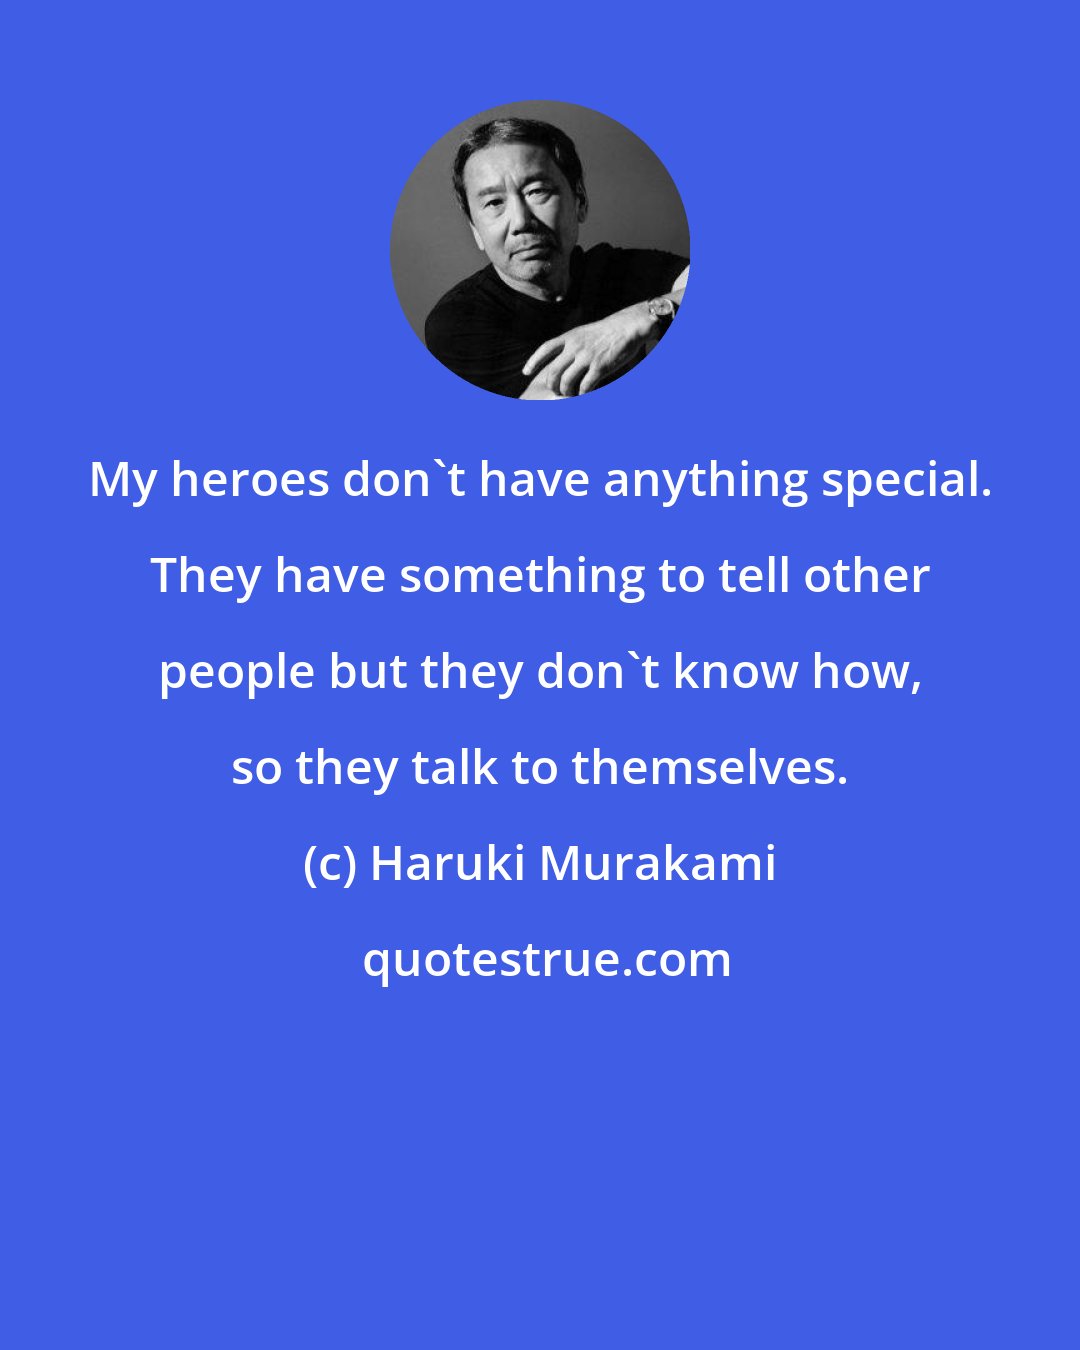 Haruki Murakami: My heroes don't have anything special. They have something to tell other people but they don't know how, so they talk to themselves.